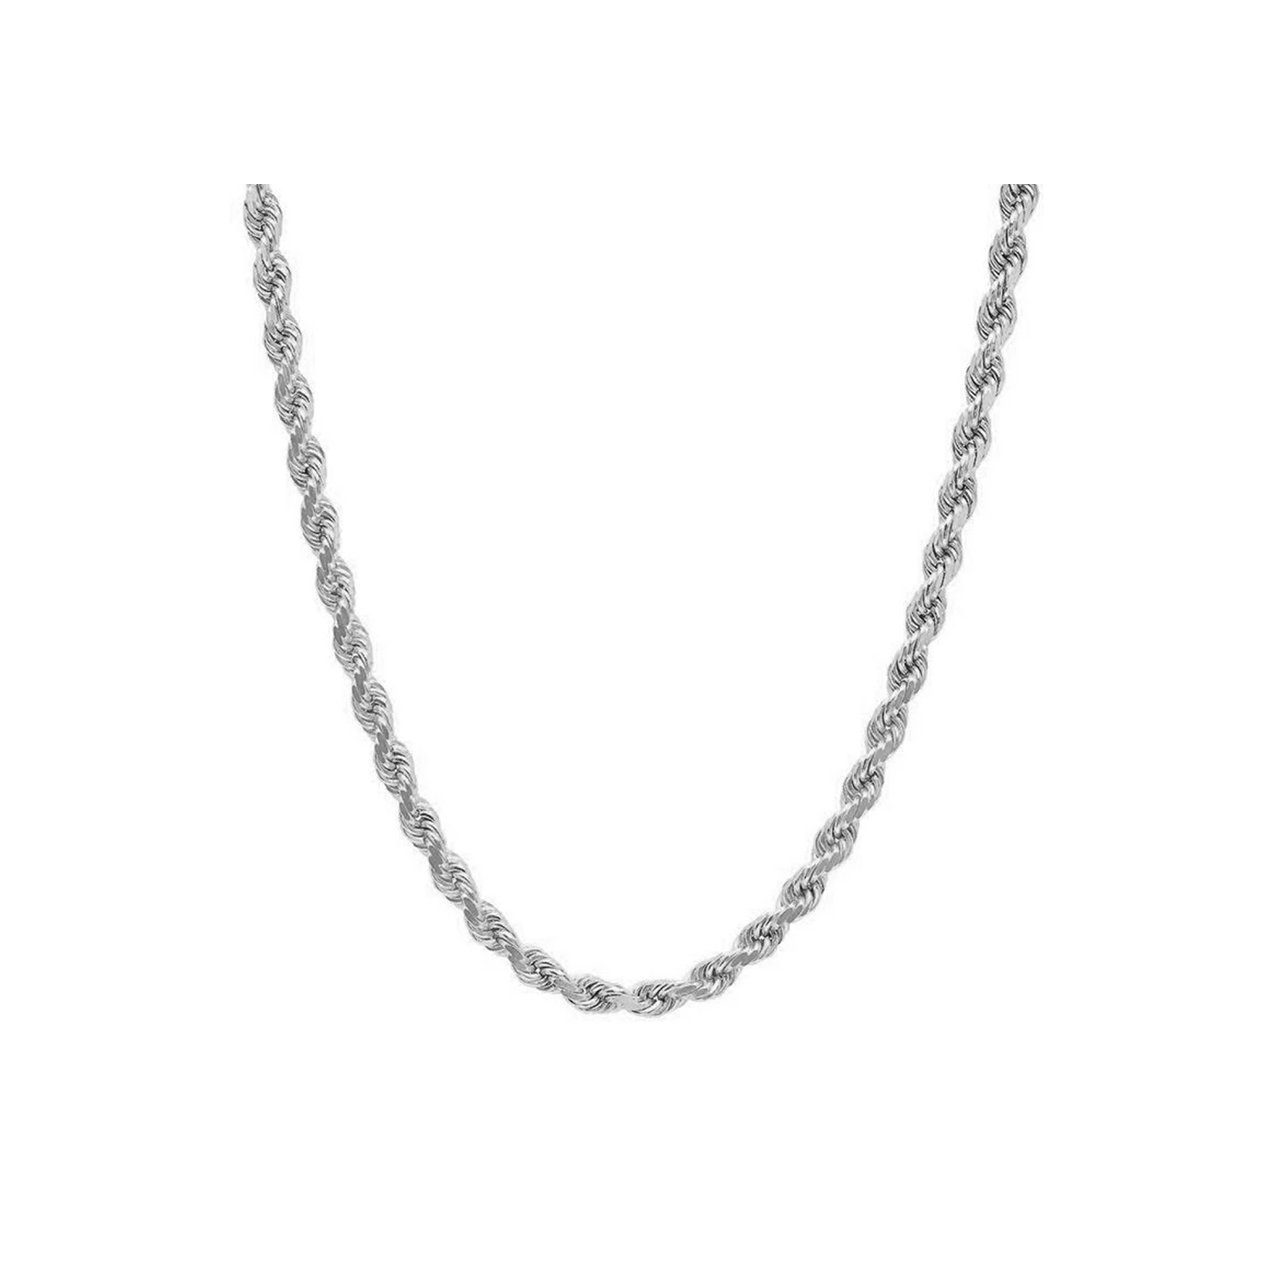 3.2mm Sterling Silver Rope Chain